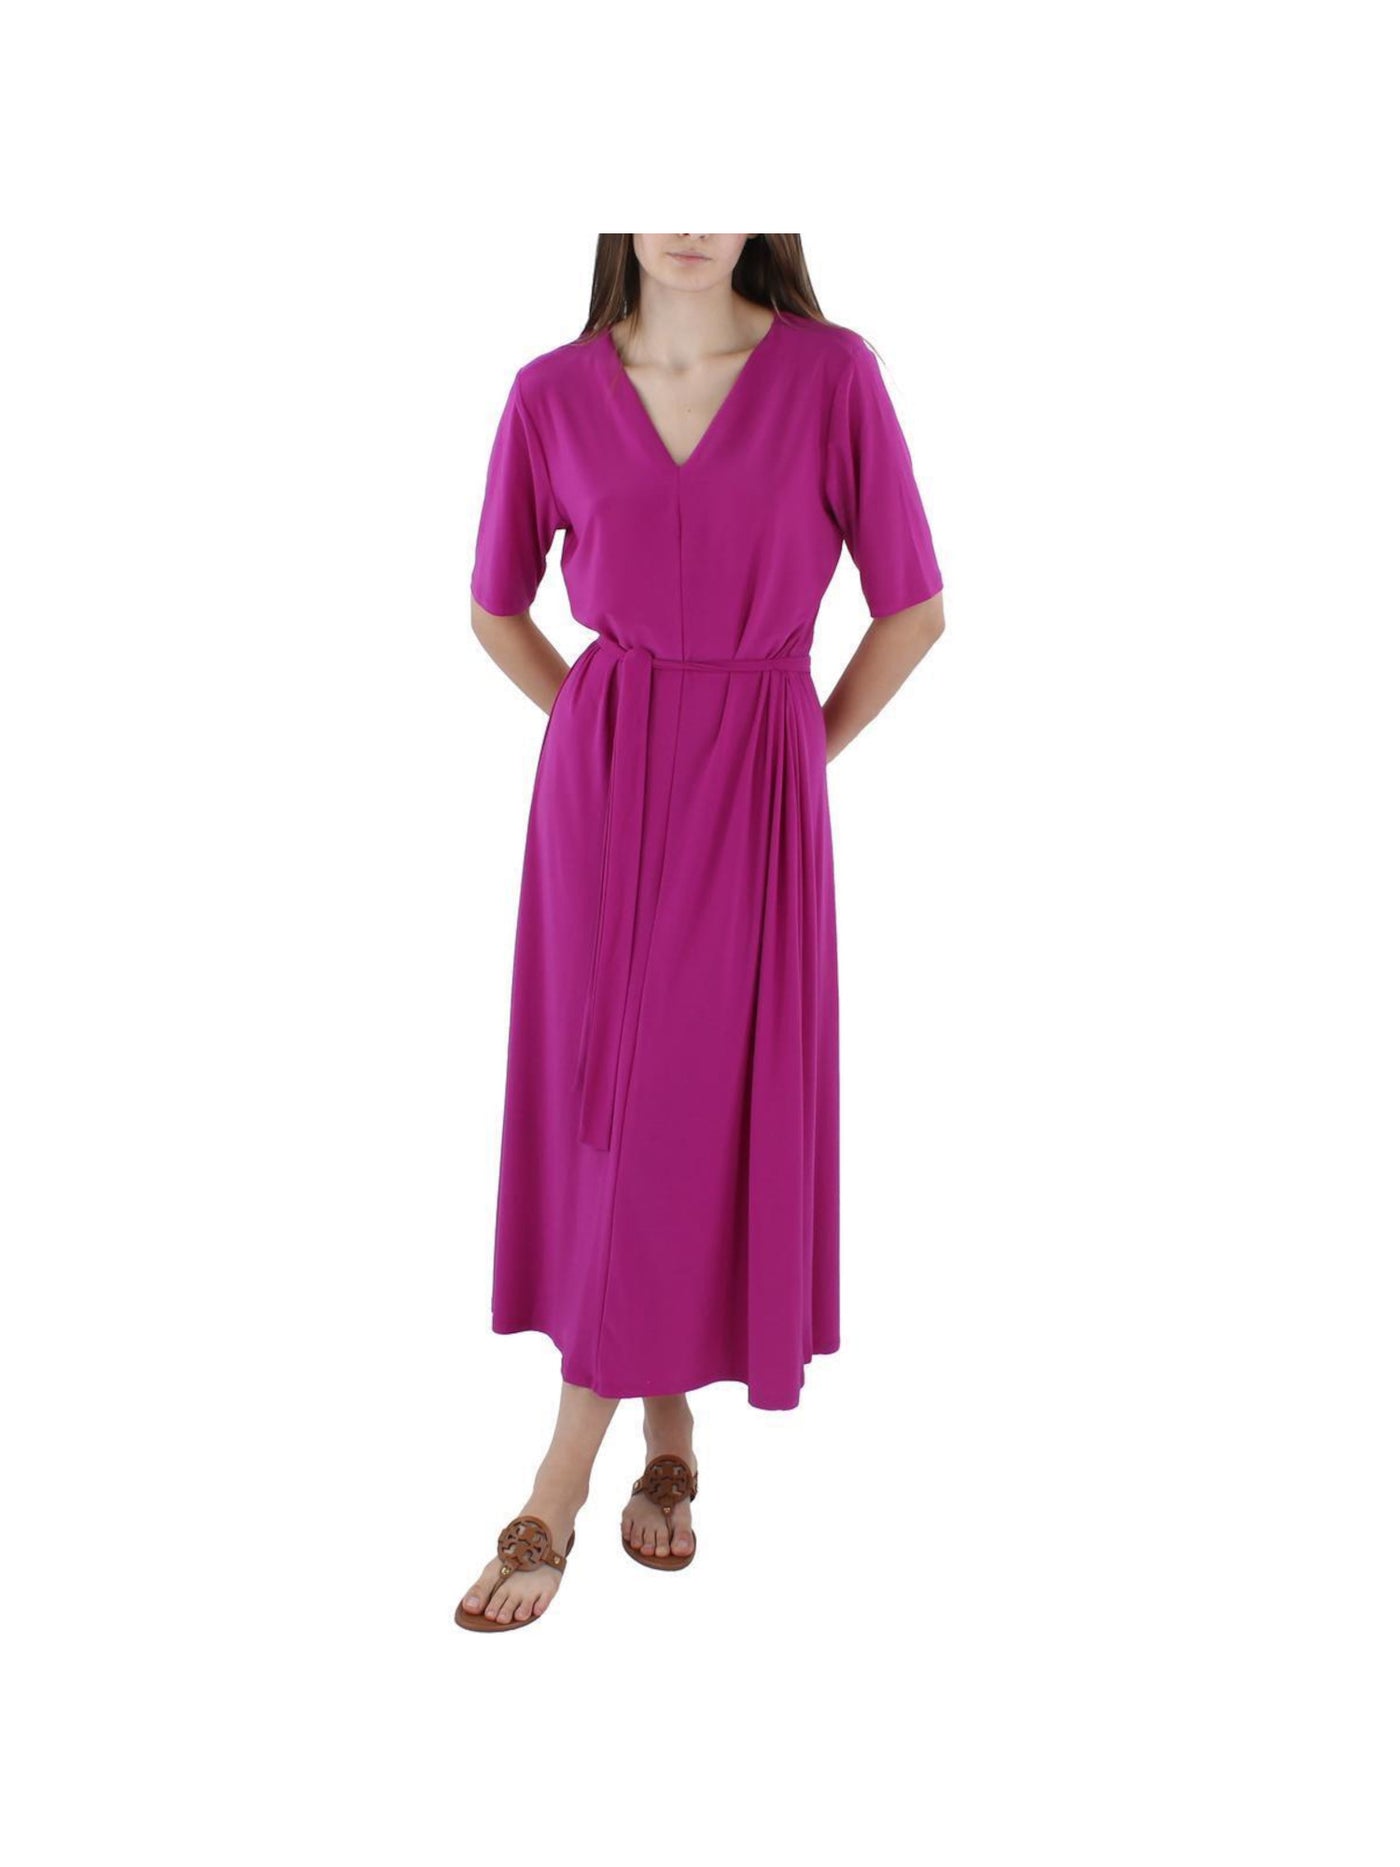 MSK Womens Purple Tie Unlined Pullover Elbow Sleeve V Neck Midi Fit + Flare Dress S